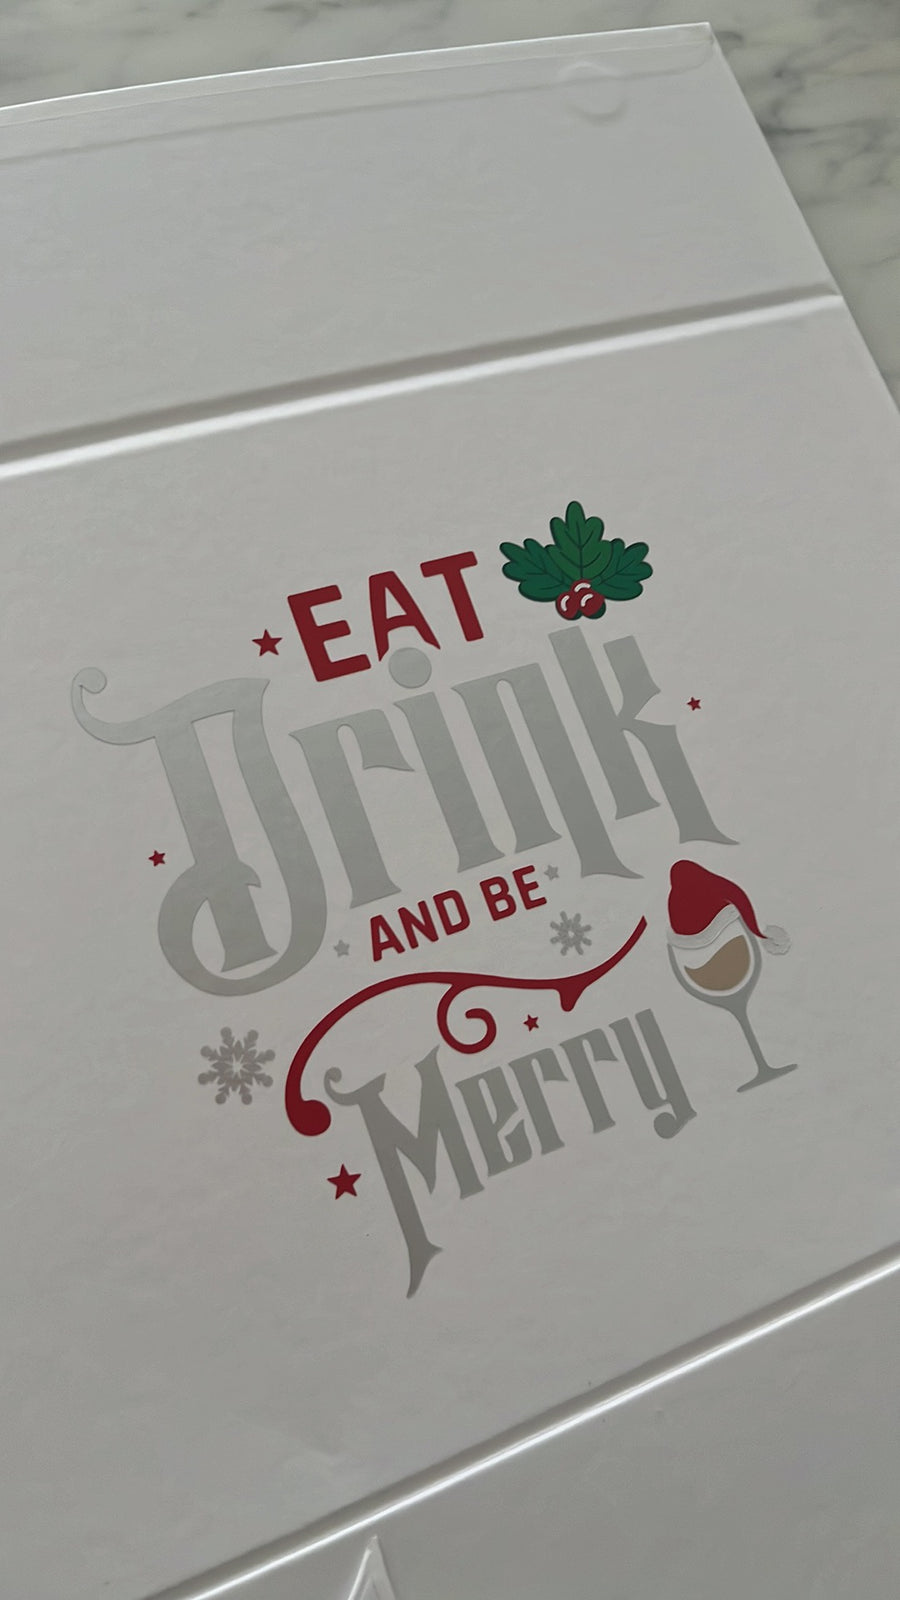 Christmas - Eat drink and be merry!